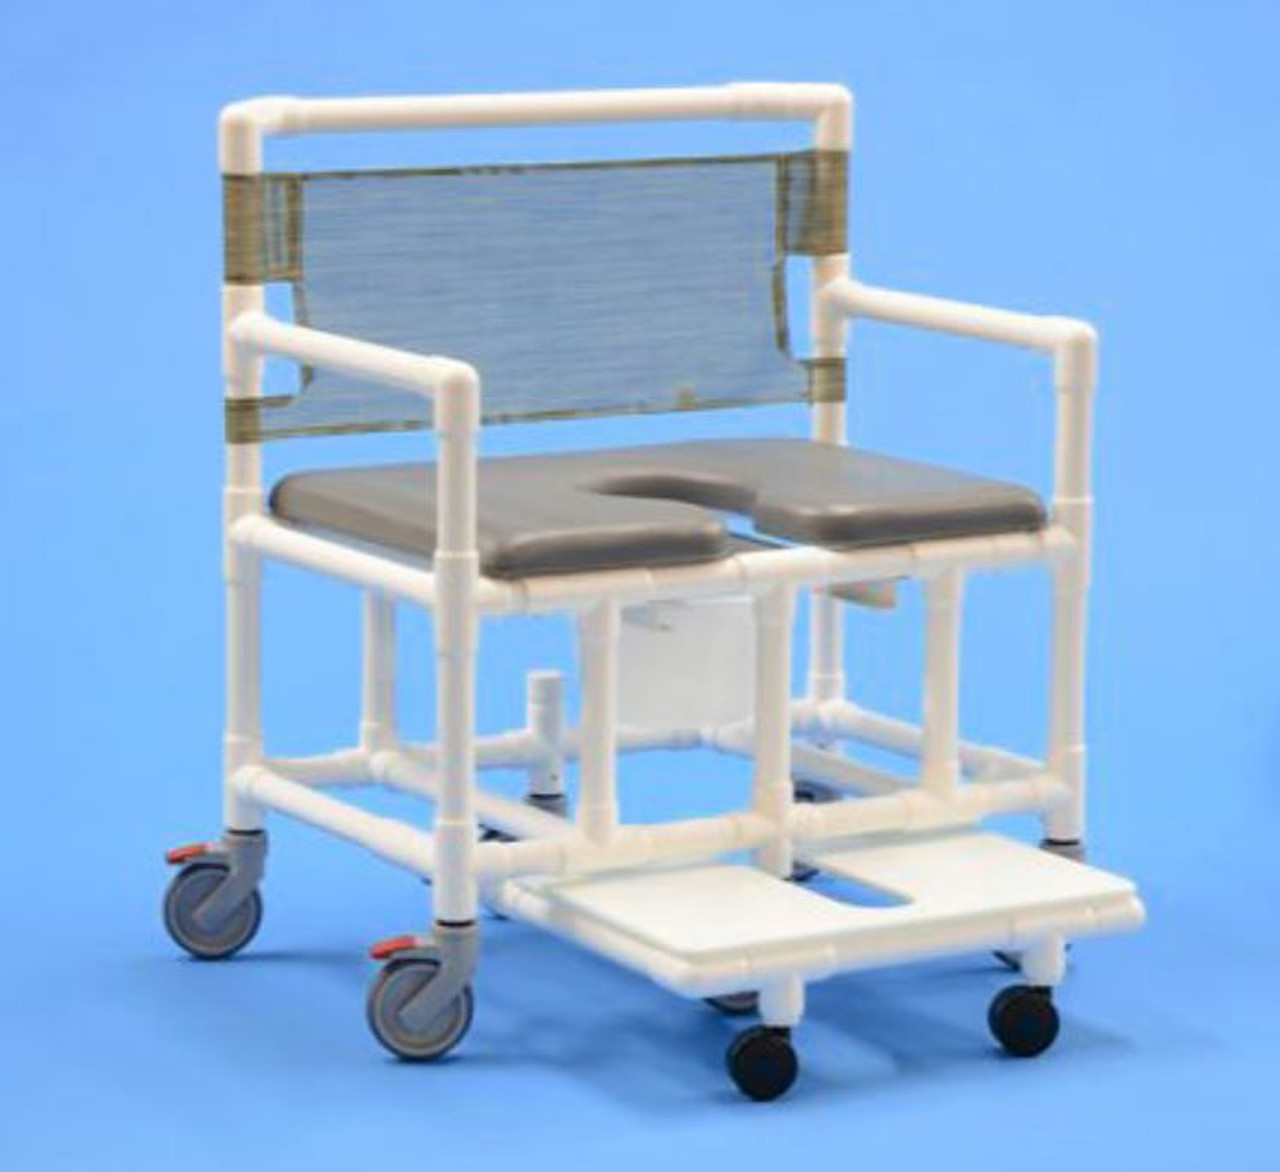 700 Pound Weight Capacity Rolling Shower Commode Chair Careprodx